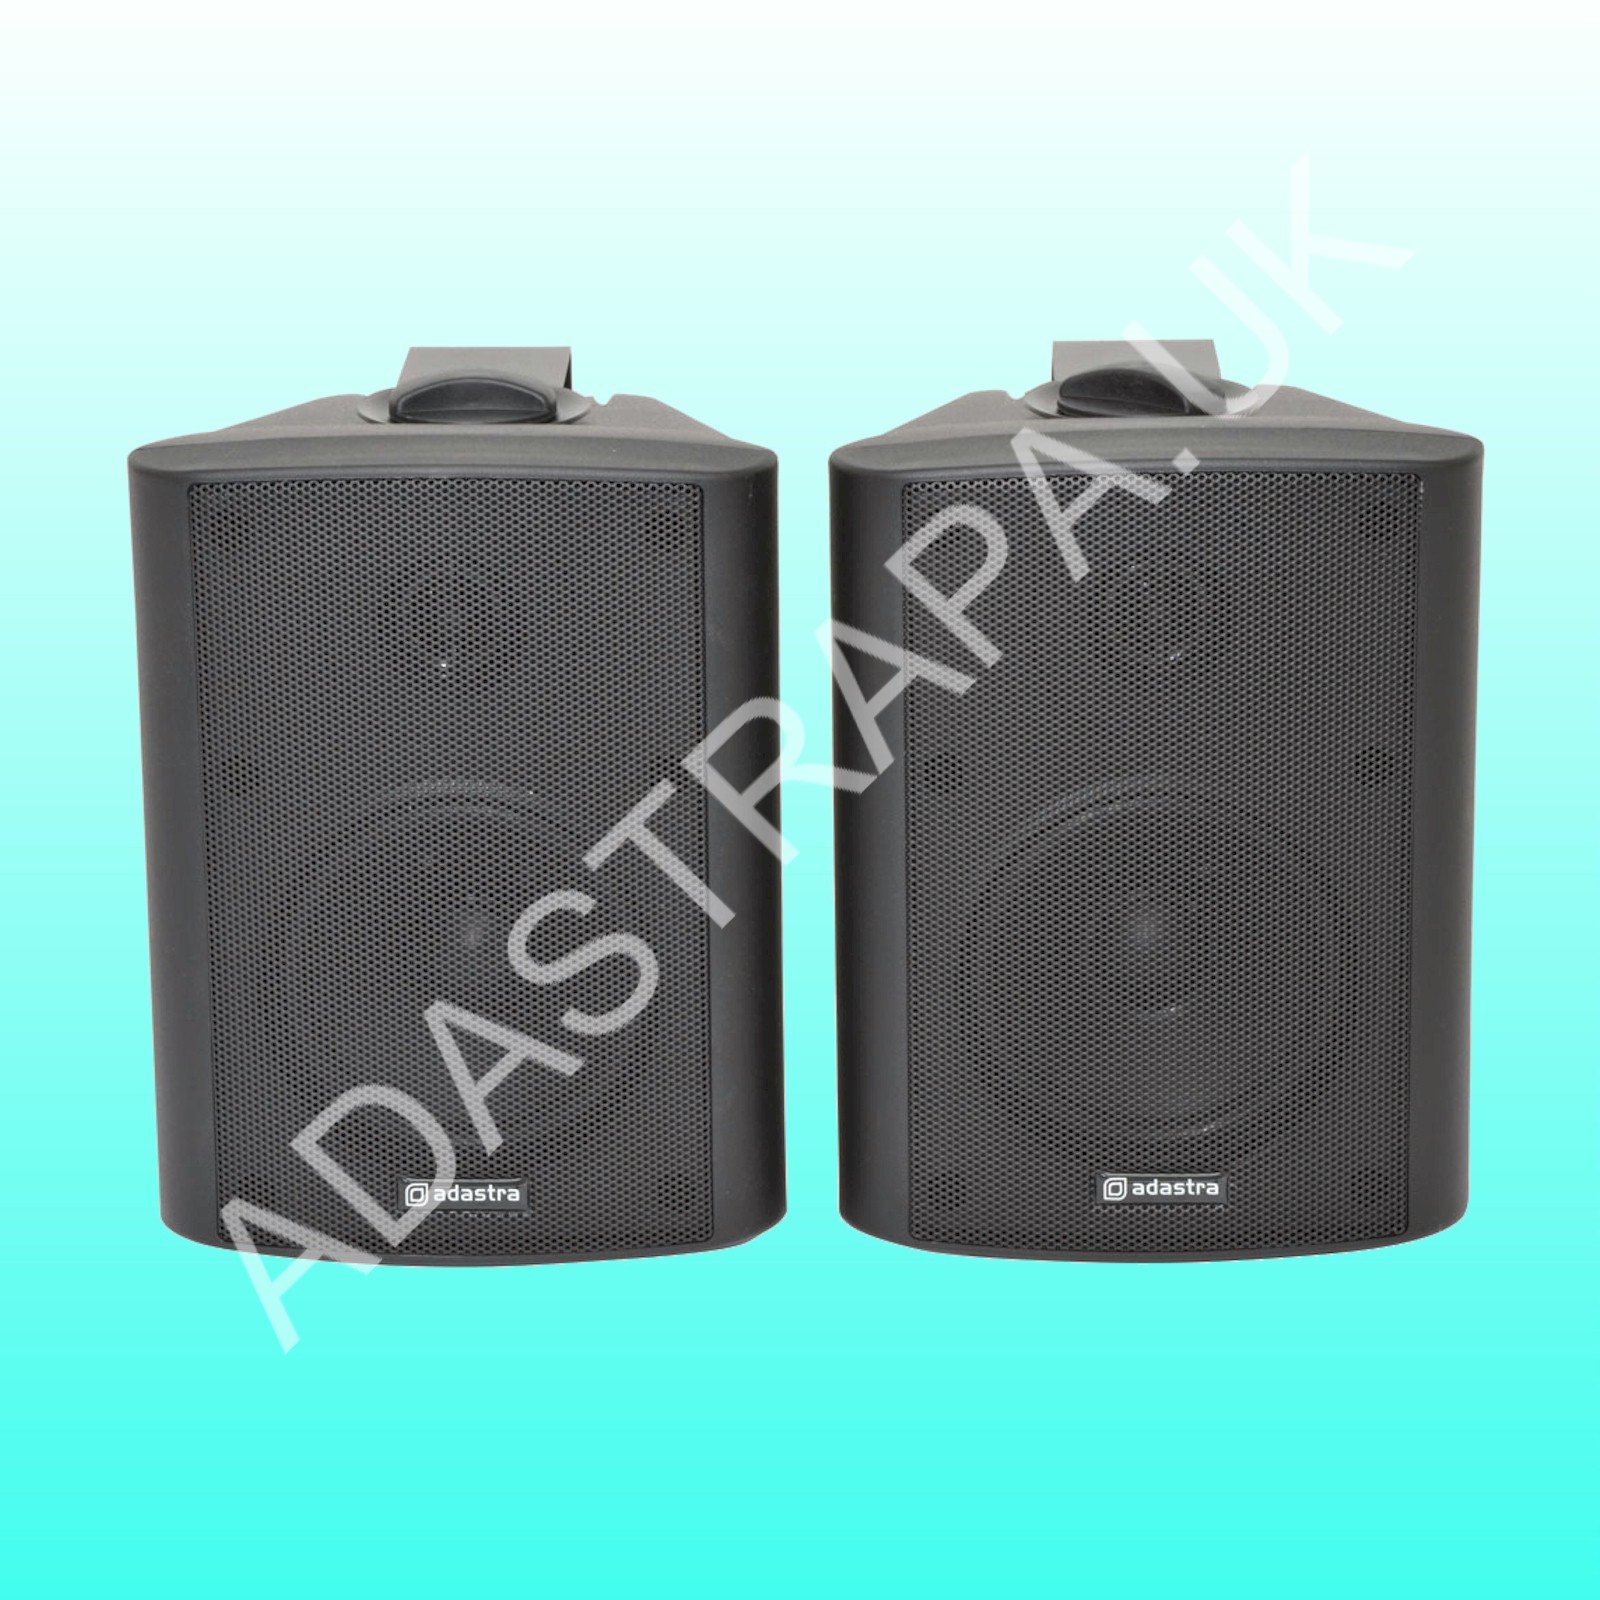 Adastra A4/BC6-B 4 x 200W rms Stereo Indoor Music PA System 60W rms 6.5